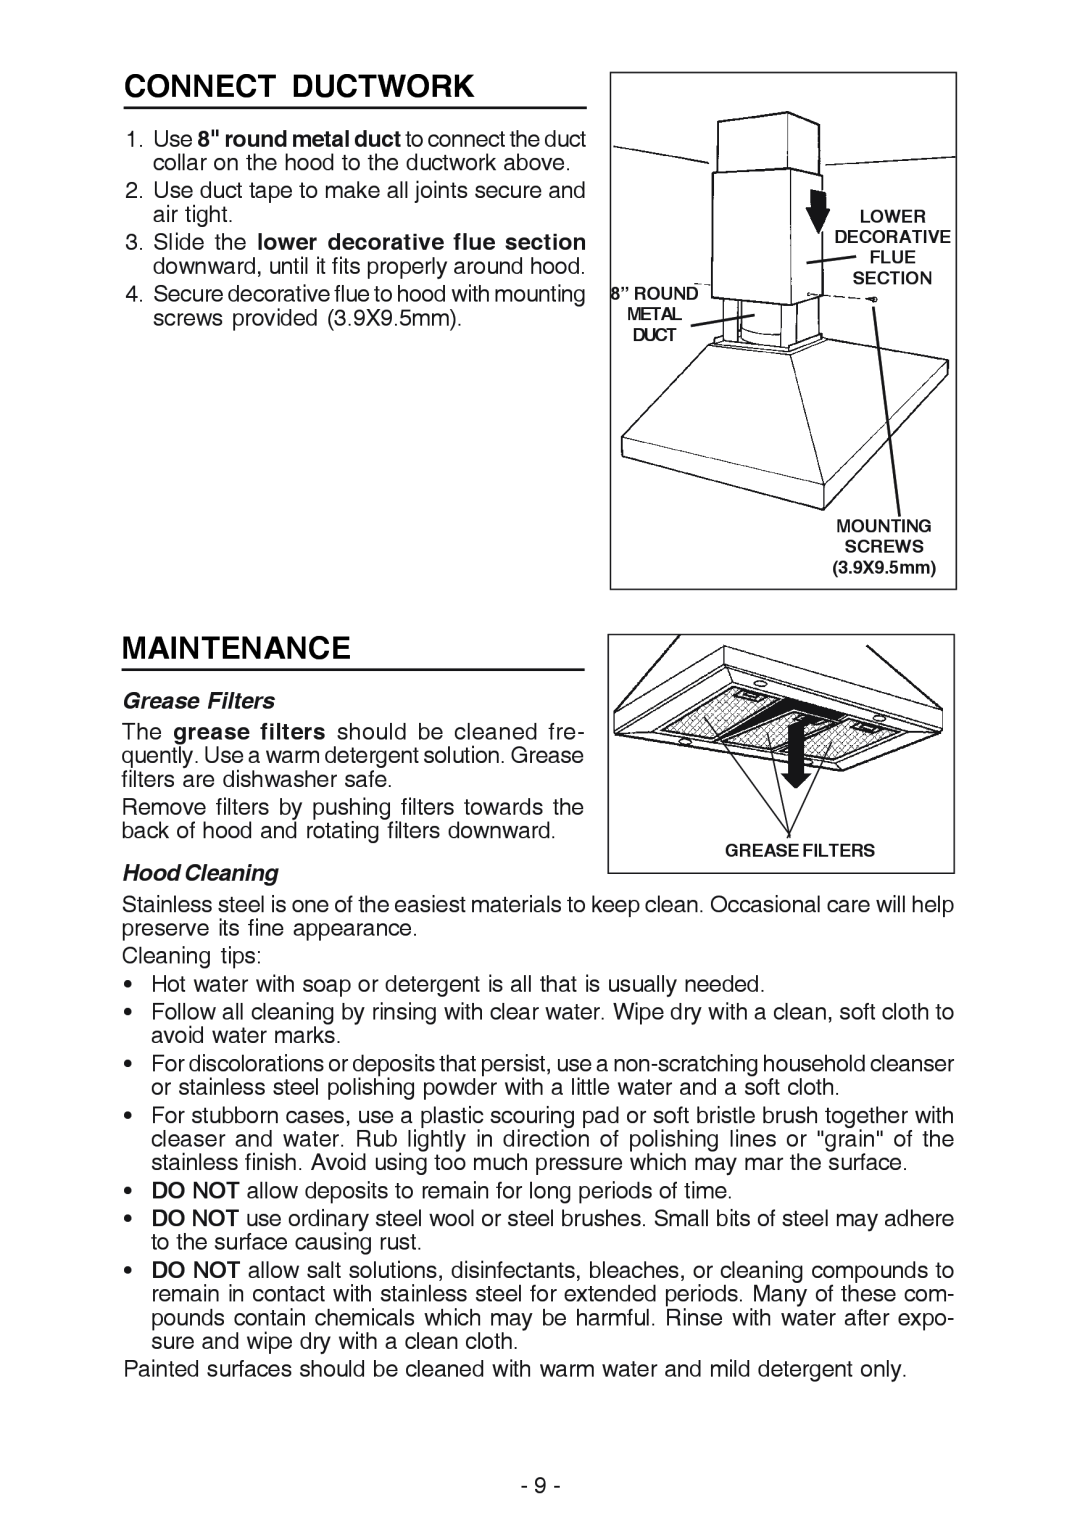 Broan 637004 manual Connect Ductwork, Maintenance, Grease Filters, Hood Cleaning 